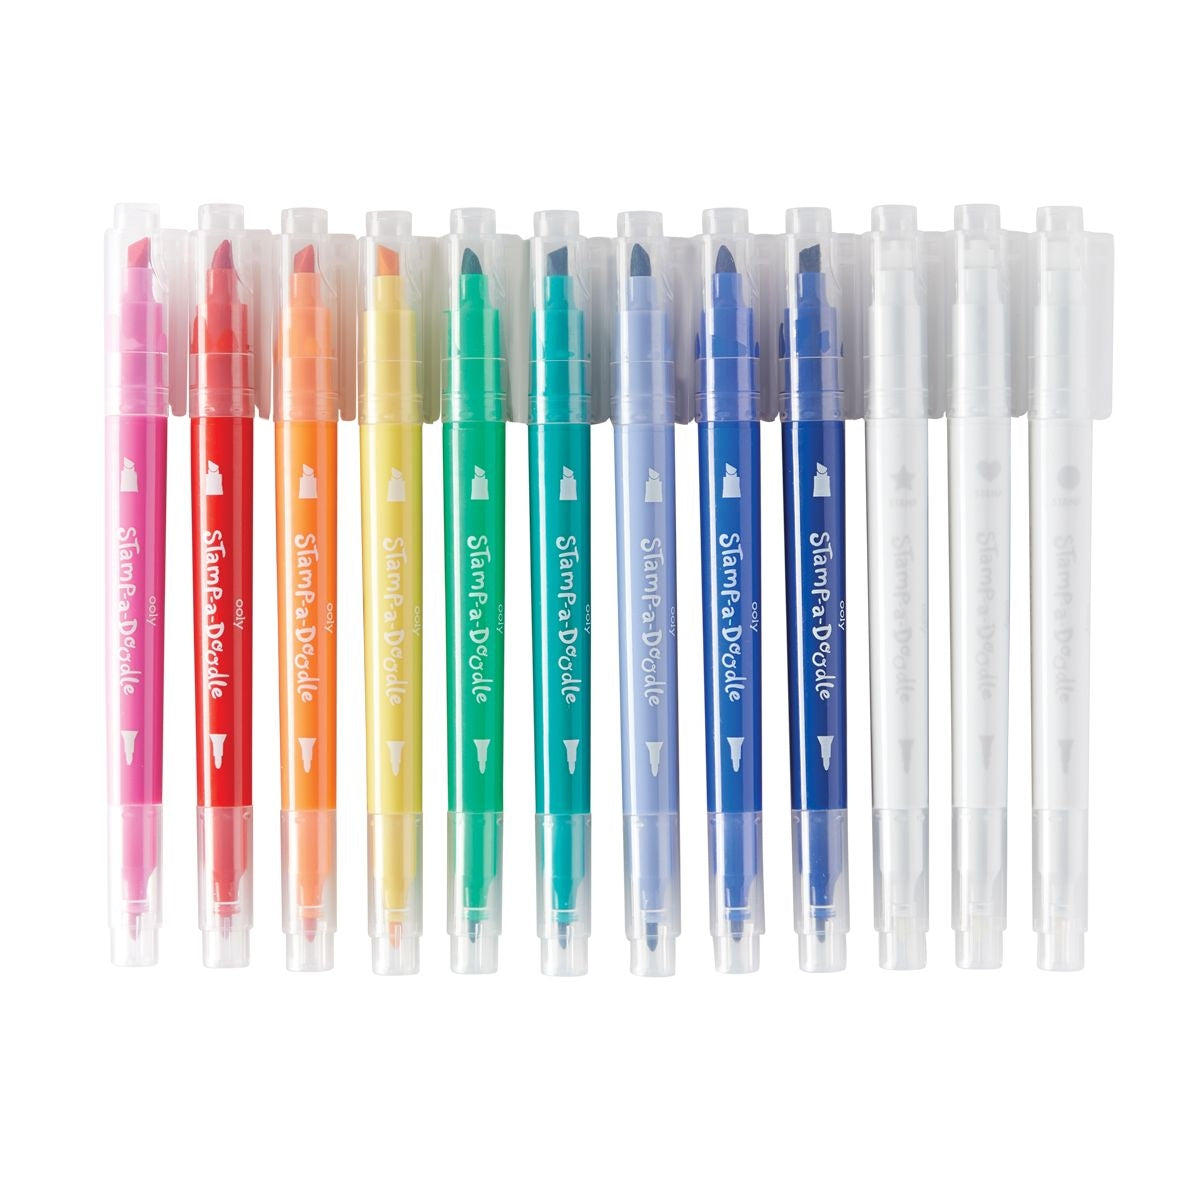 Stamp-A-Doodle Double-Ended Markers